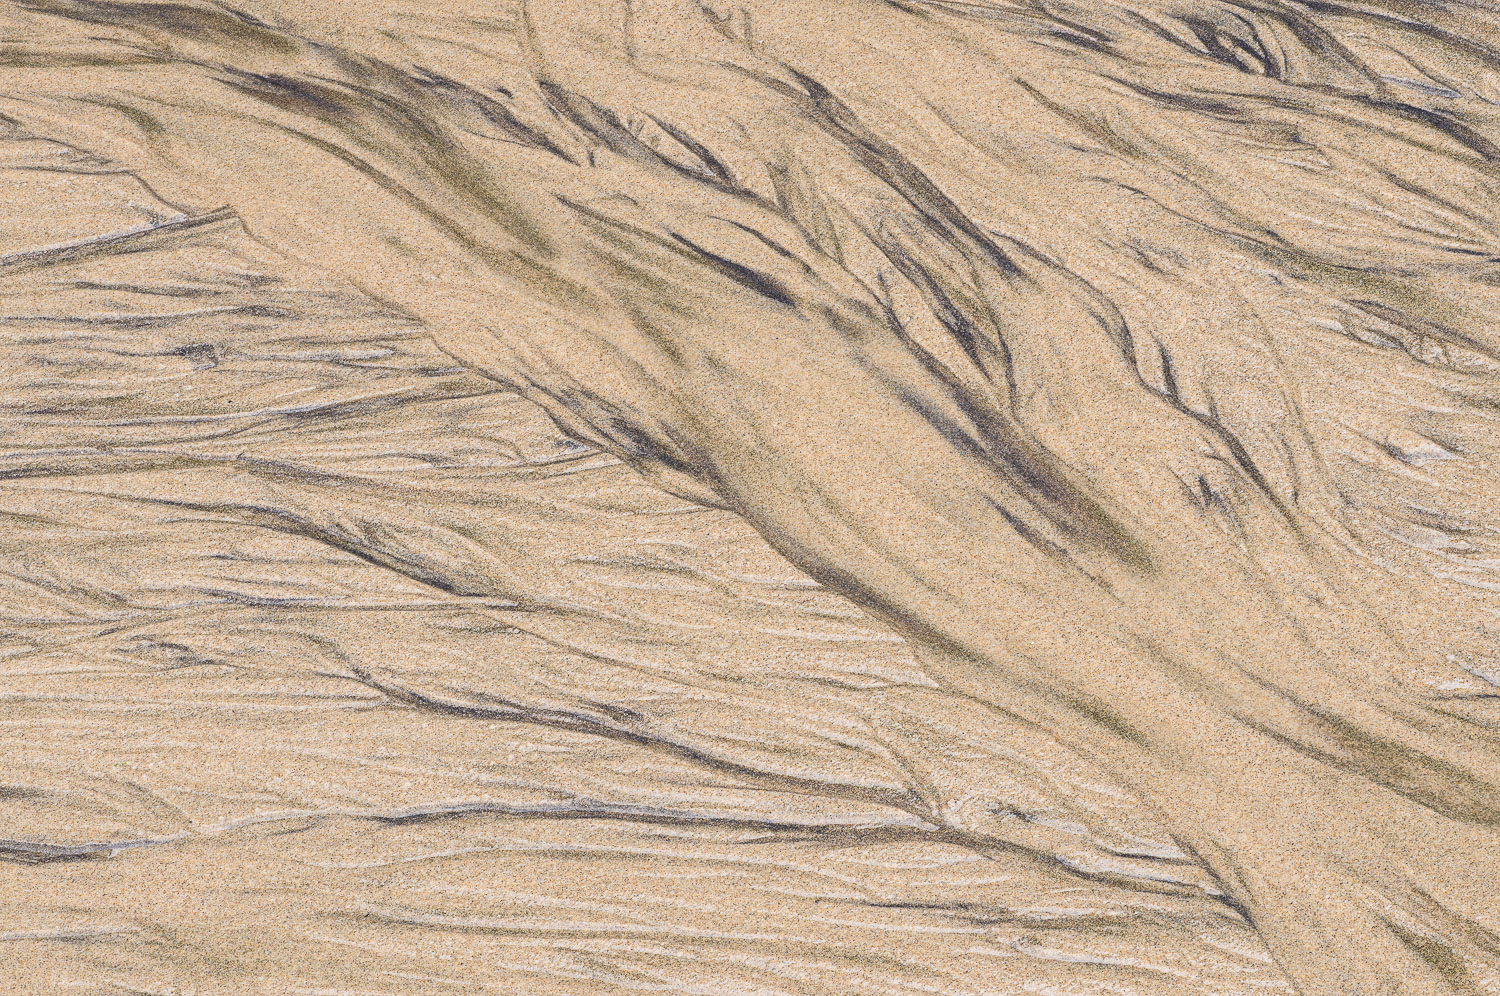 Patterns created by rainwater runoff as it courses over beach sand on the Oregon coast. Image #4601